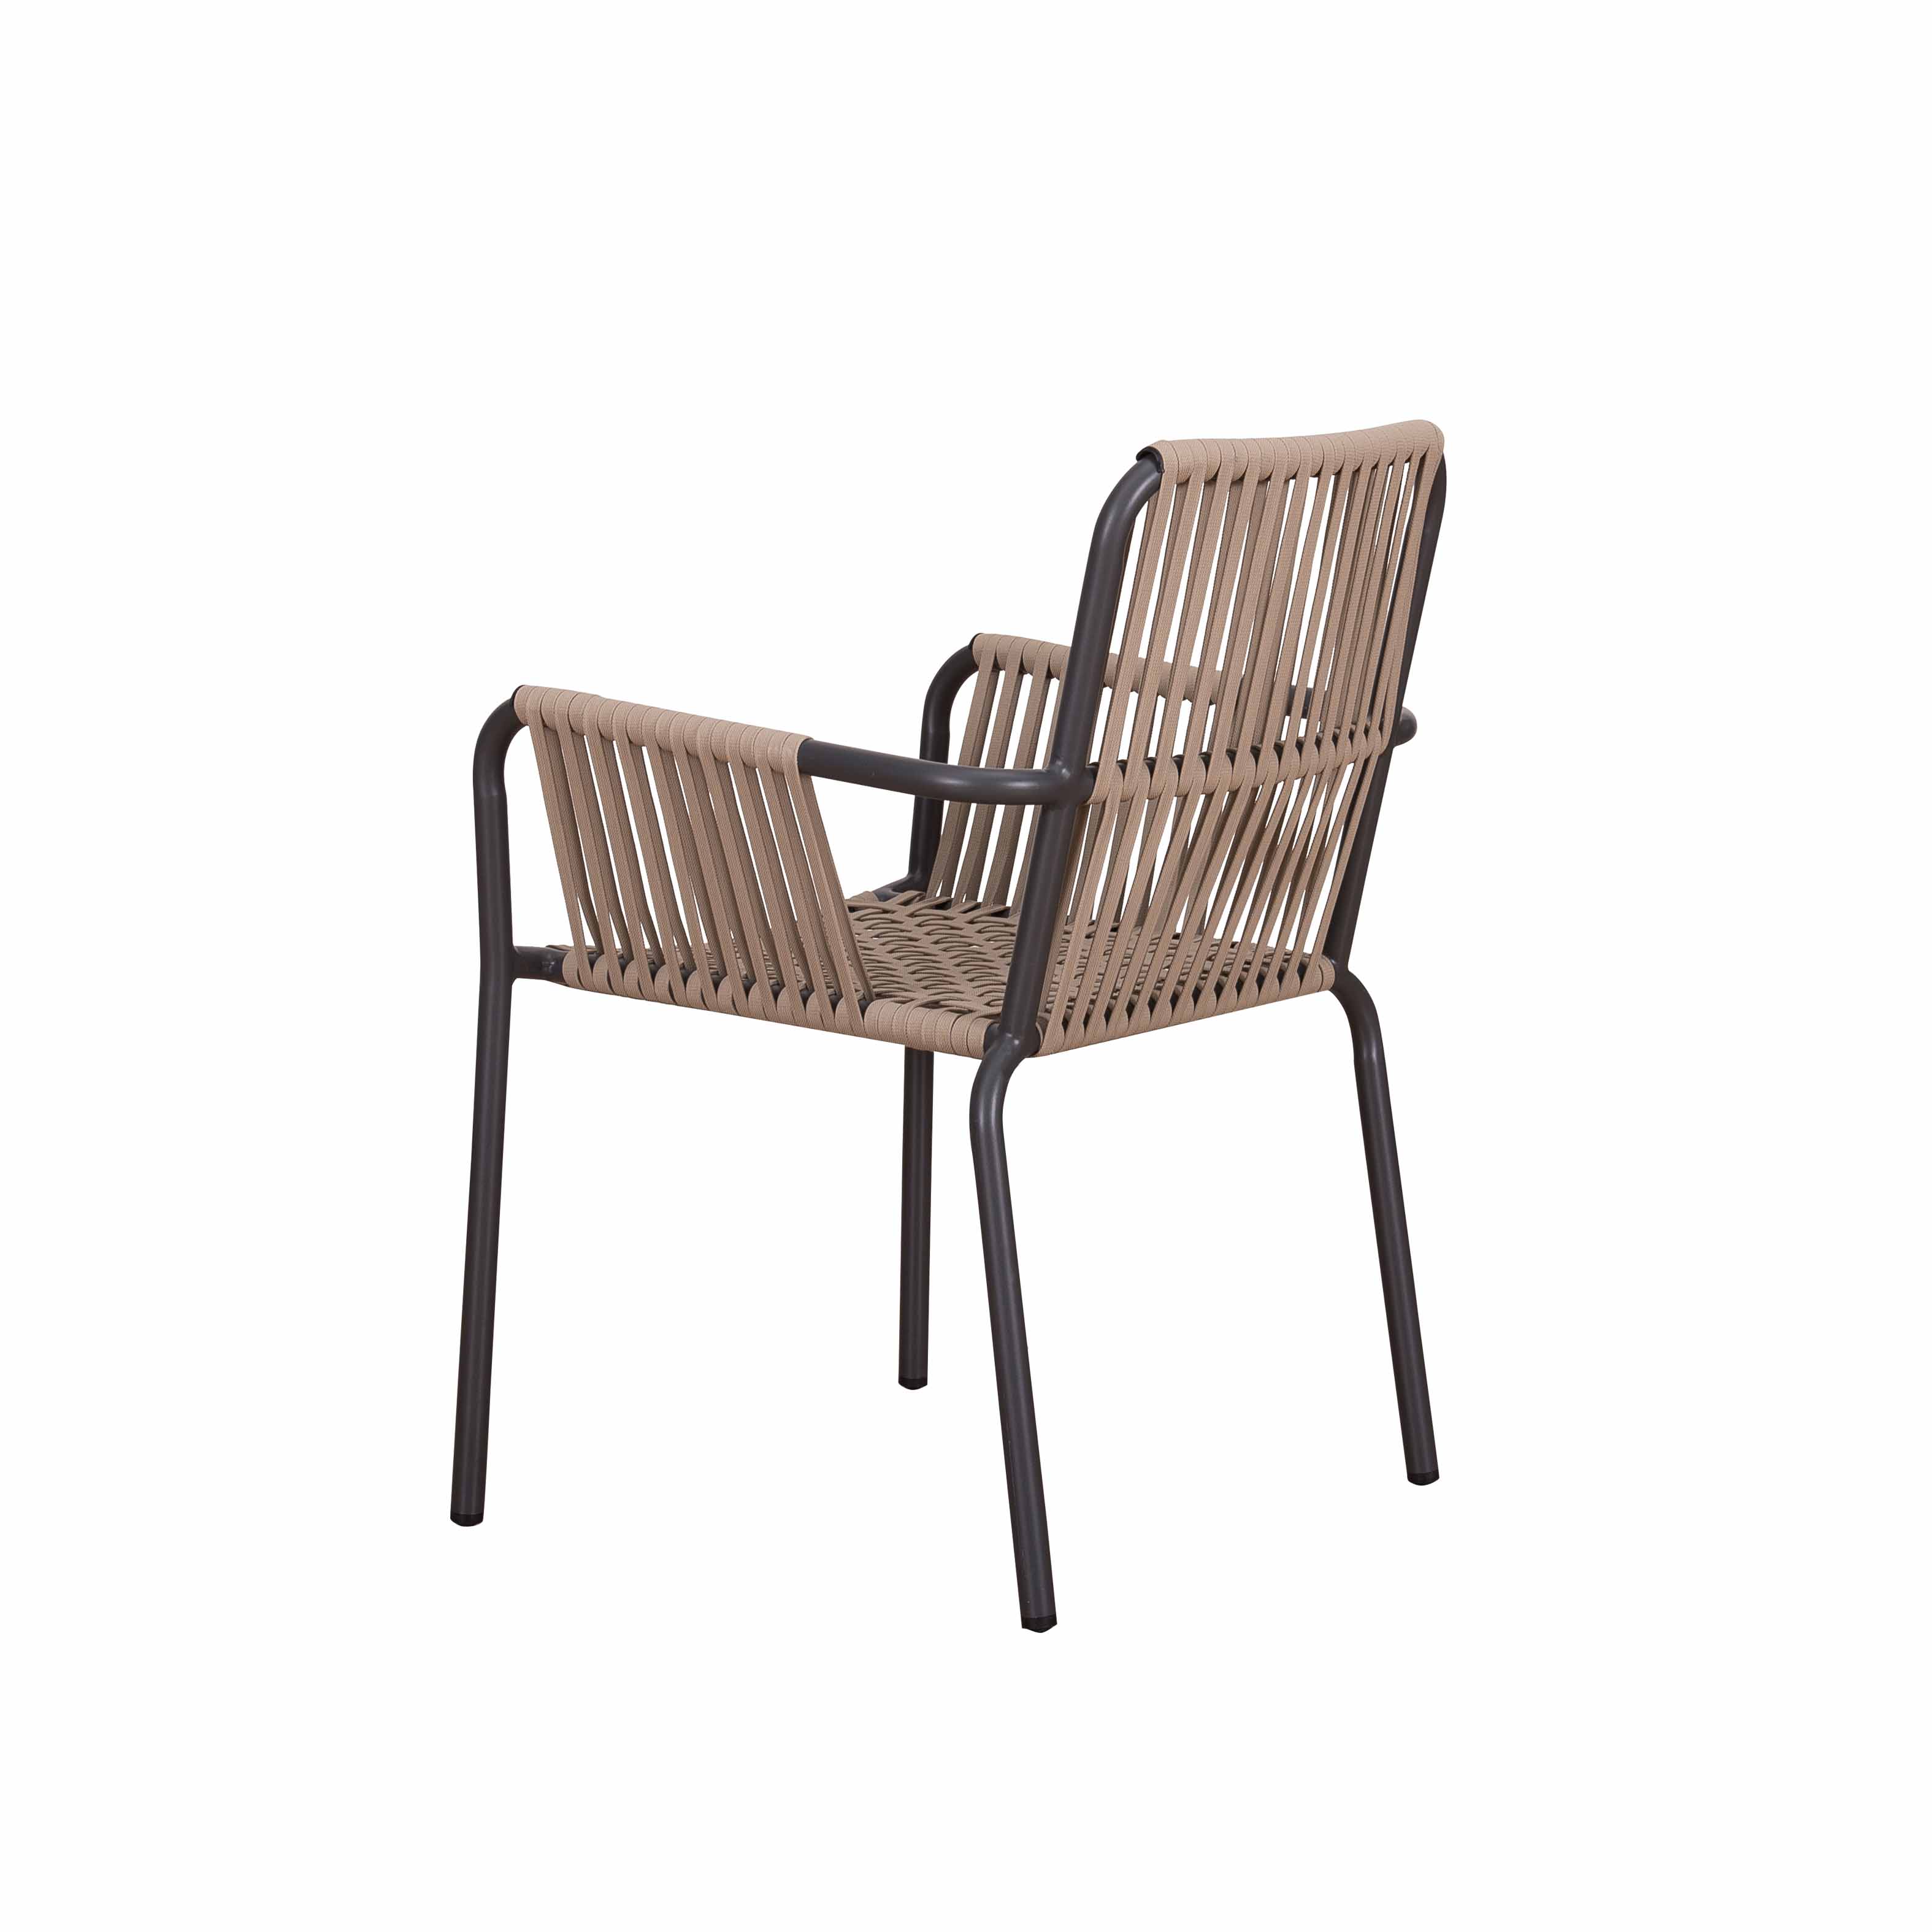 Lincoln rope chair S7